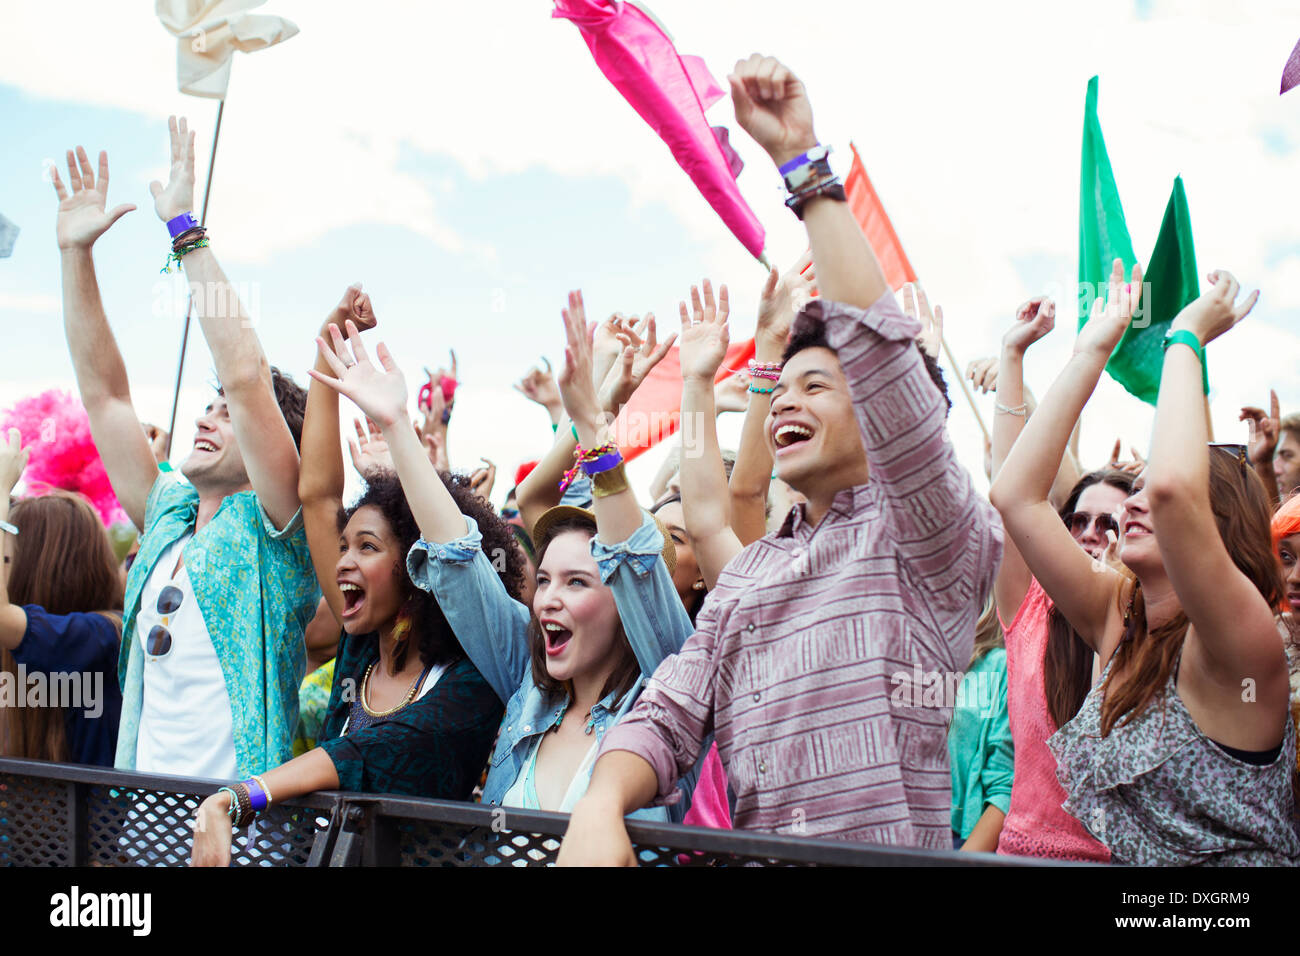 Fans cheering at music festival Stock Photo